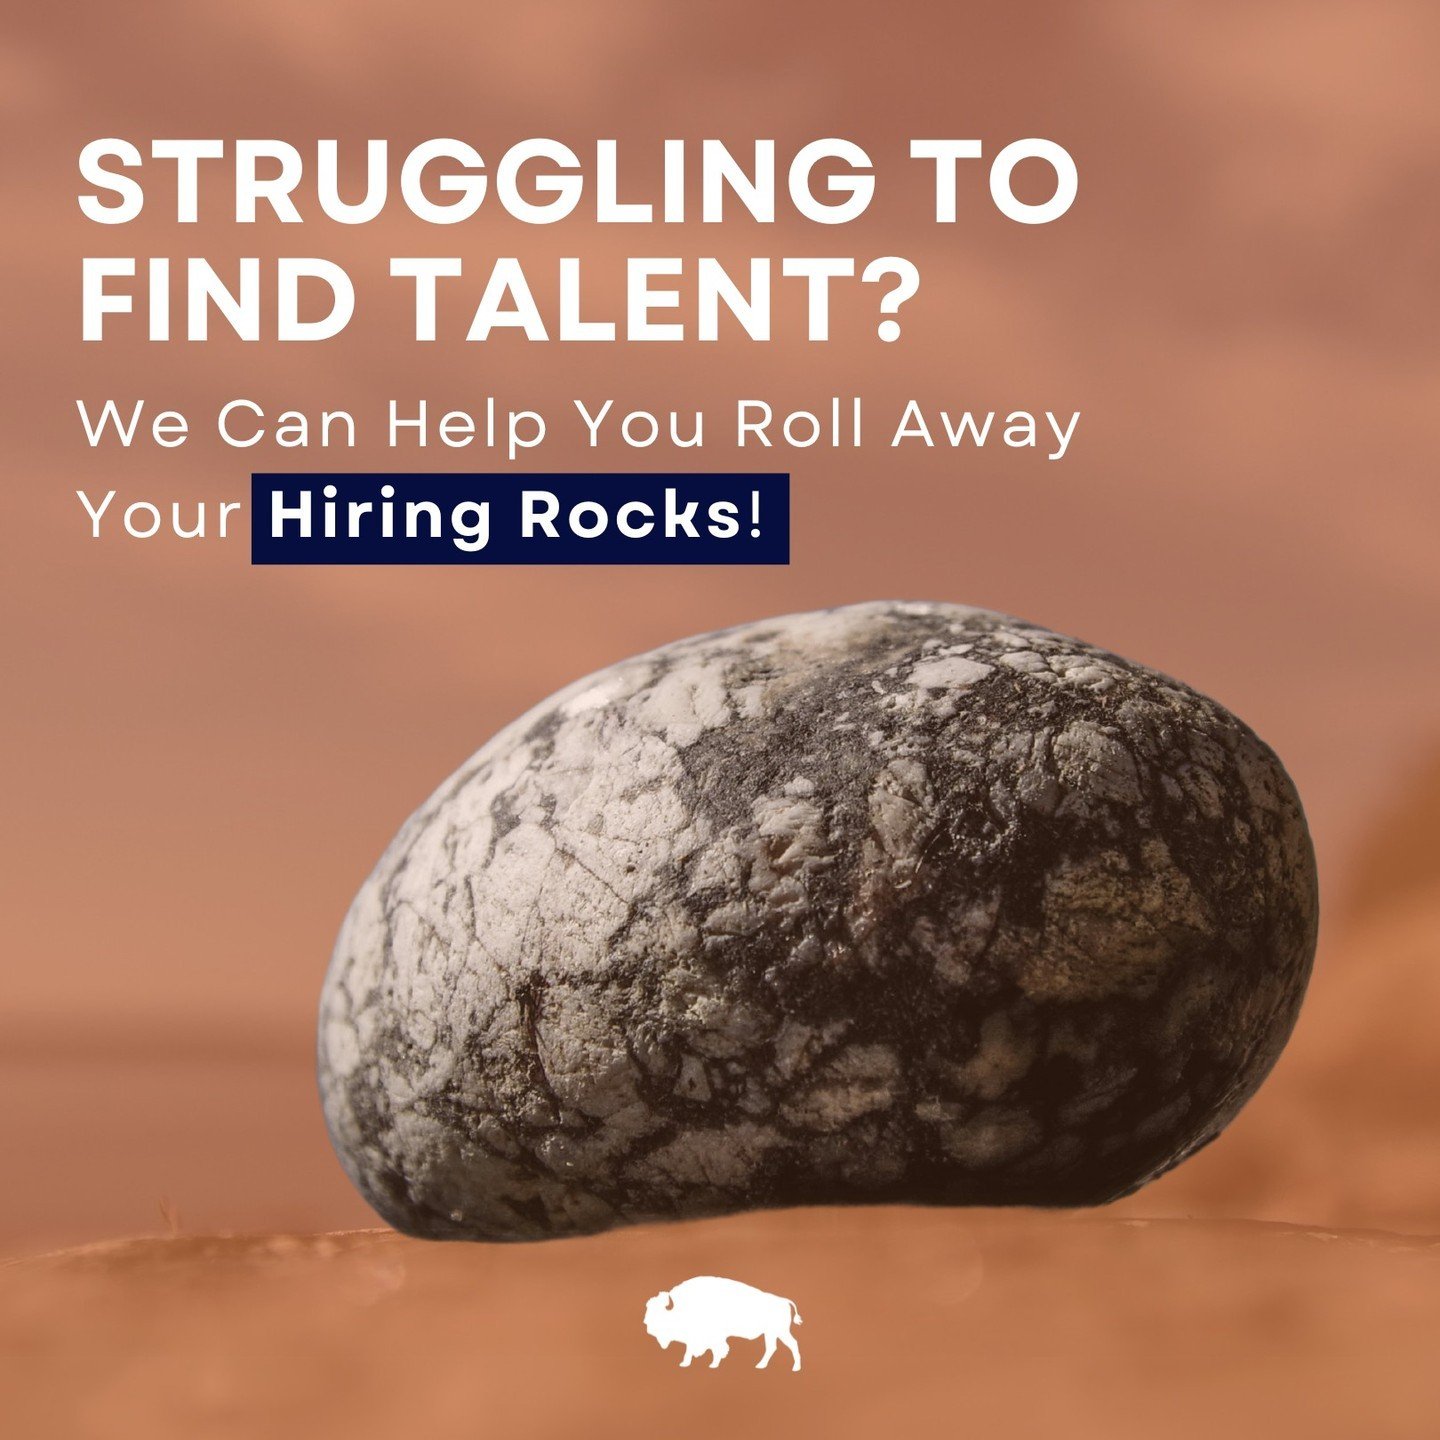 Is your team struggling to find the talent? Don't let those &quot;Hiring Rocks&quot; weigh you down any longer. 

Our Talent Acquisition team is here to be your partner. We'll work closely with you to understand your most critical hiring needs and fi